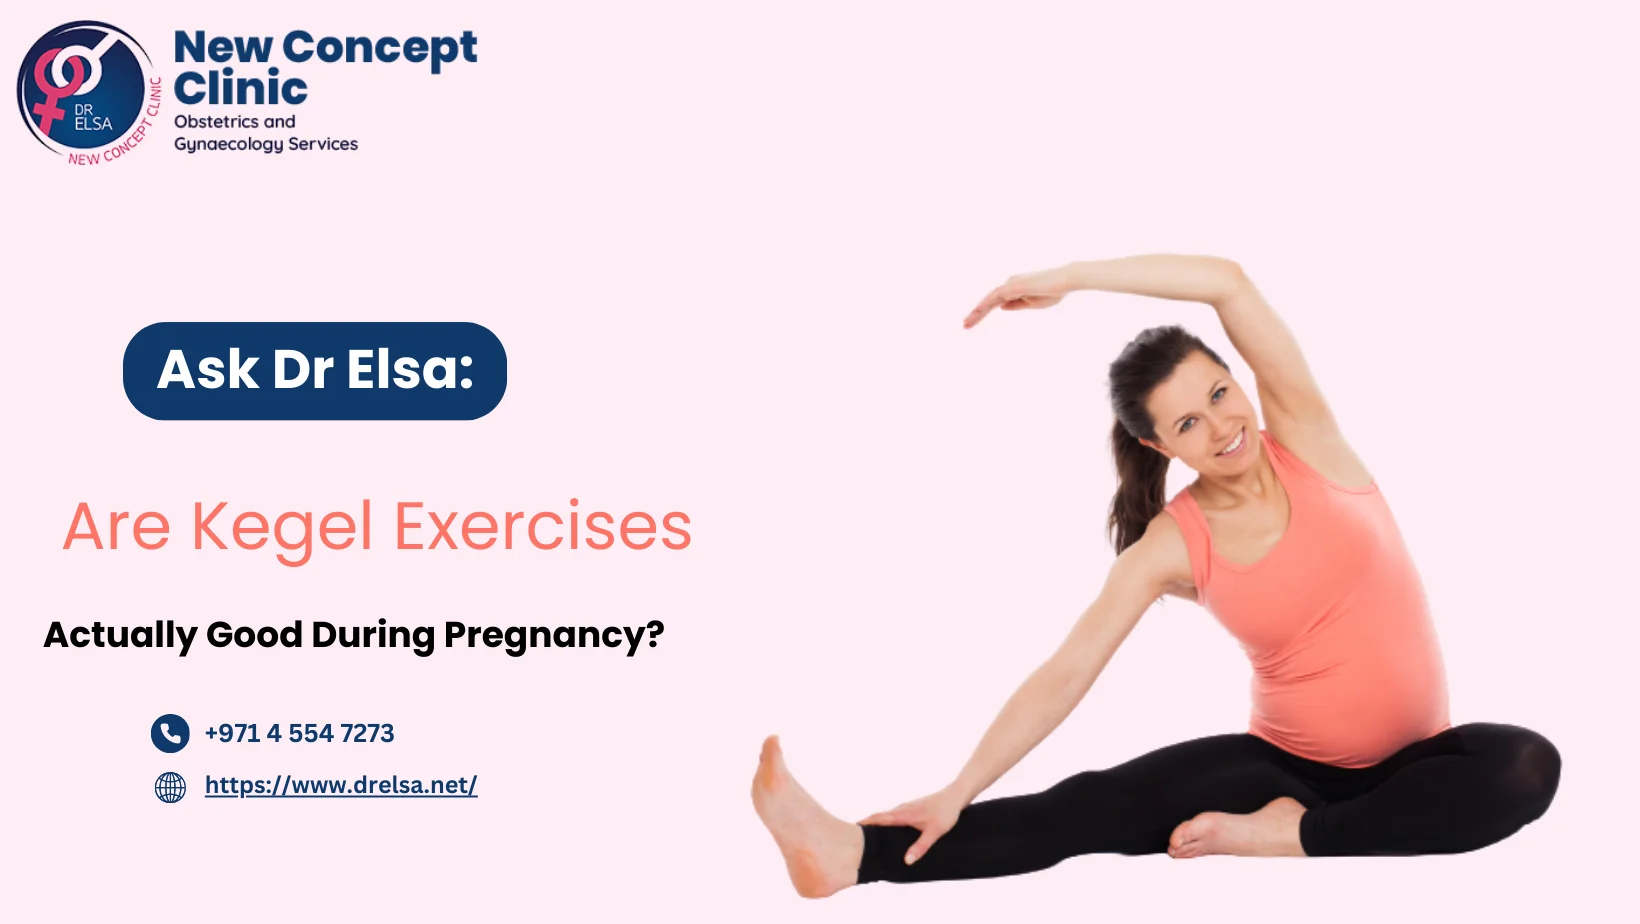 Ask Dr. Elsa: Are Kegel Exercises Actually Good During Pregnancy?